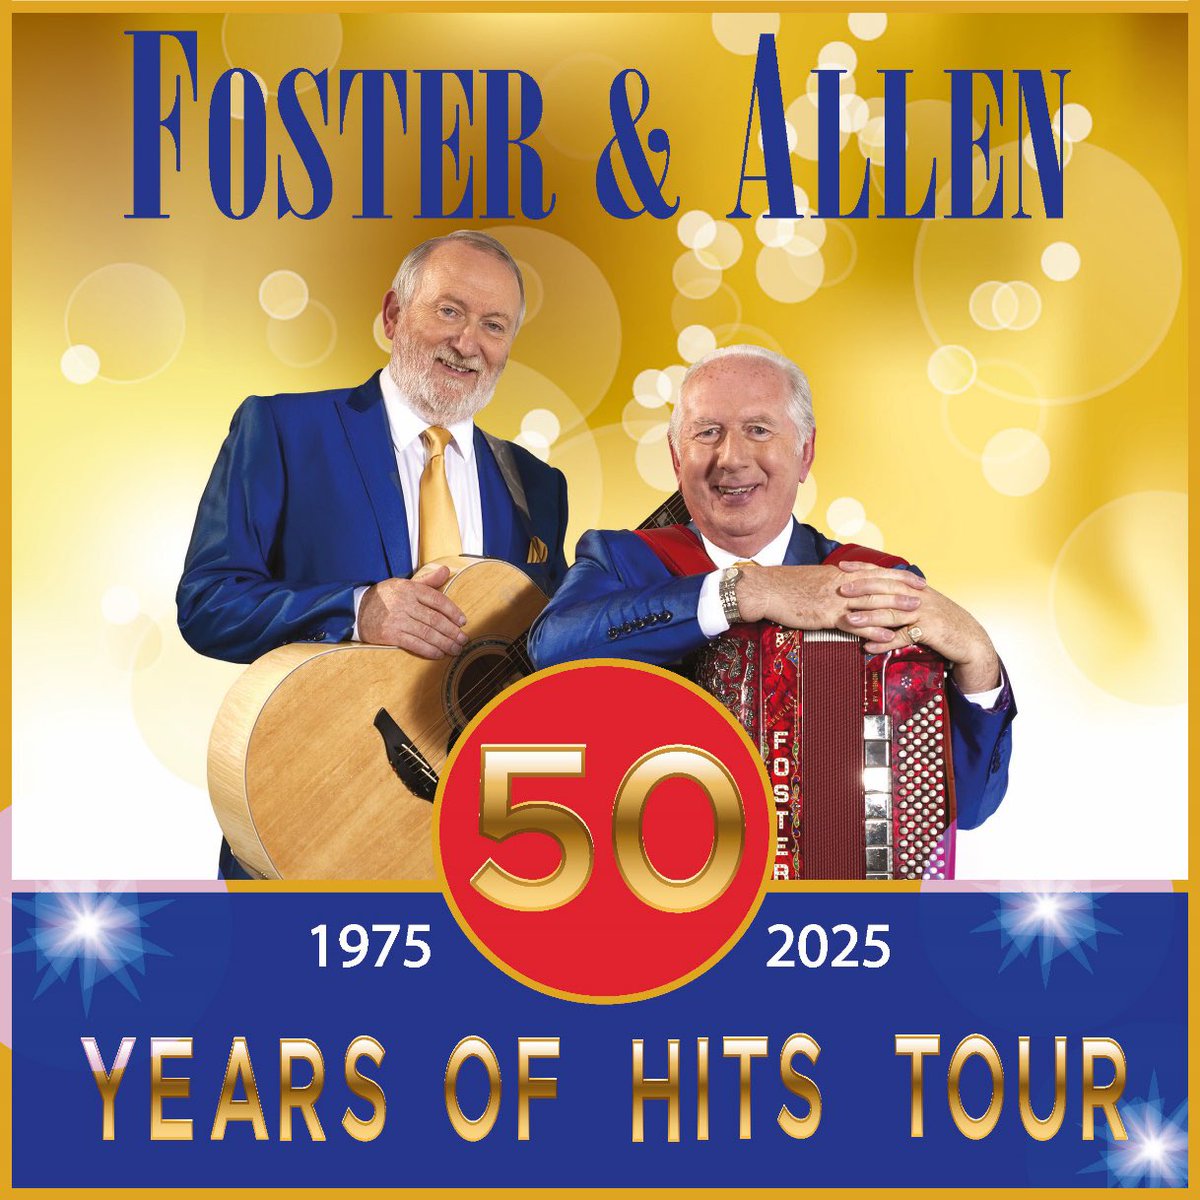 For A Night To Remember Don’t Miss @FosterAndAllen 50 Year’s Of Hits Tour at the Abbey Hotel #Roscommon on December 28th Tickets priced at €35 will be on sale from hotel reception in the coming weeks. Follow us on Facebook for details on winning some free tickets coming soon